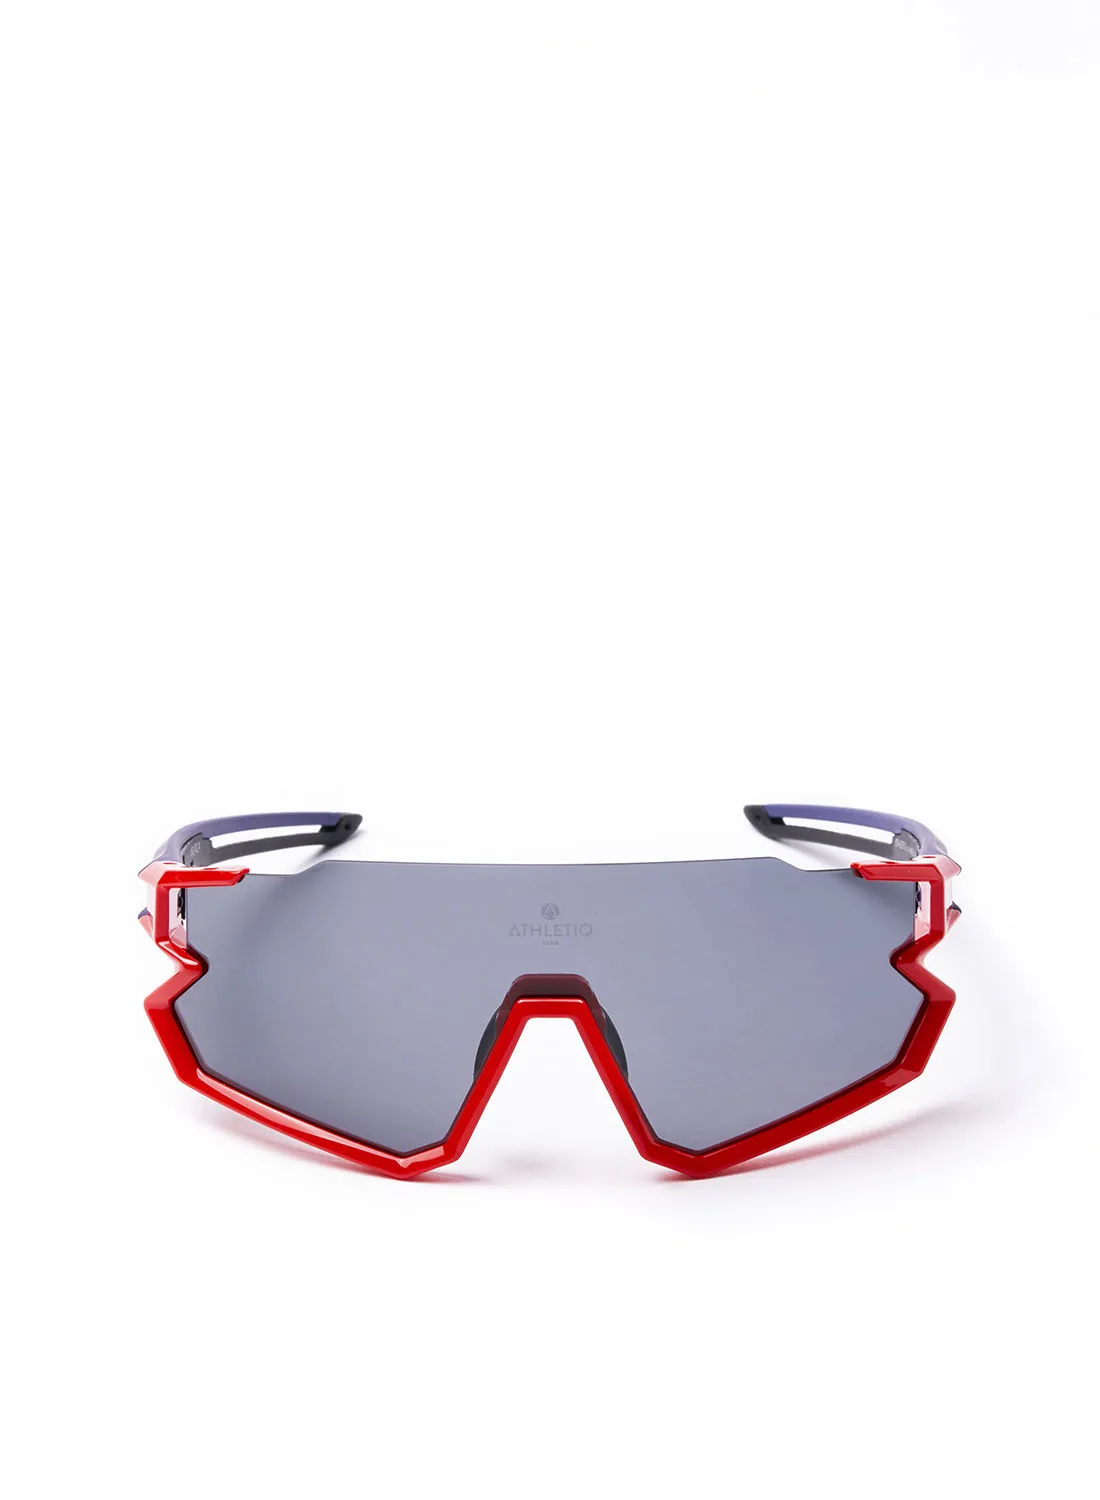 Athletiq Cycling Scooter Sunglasses - Athletiq Club Jebel Jais - Red And Blue Frame with Smoke Black Multilayer Lens